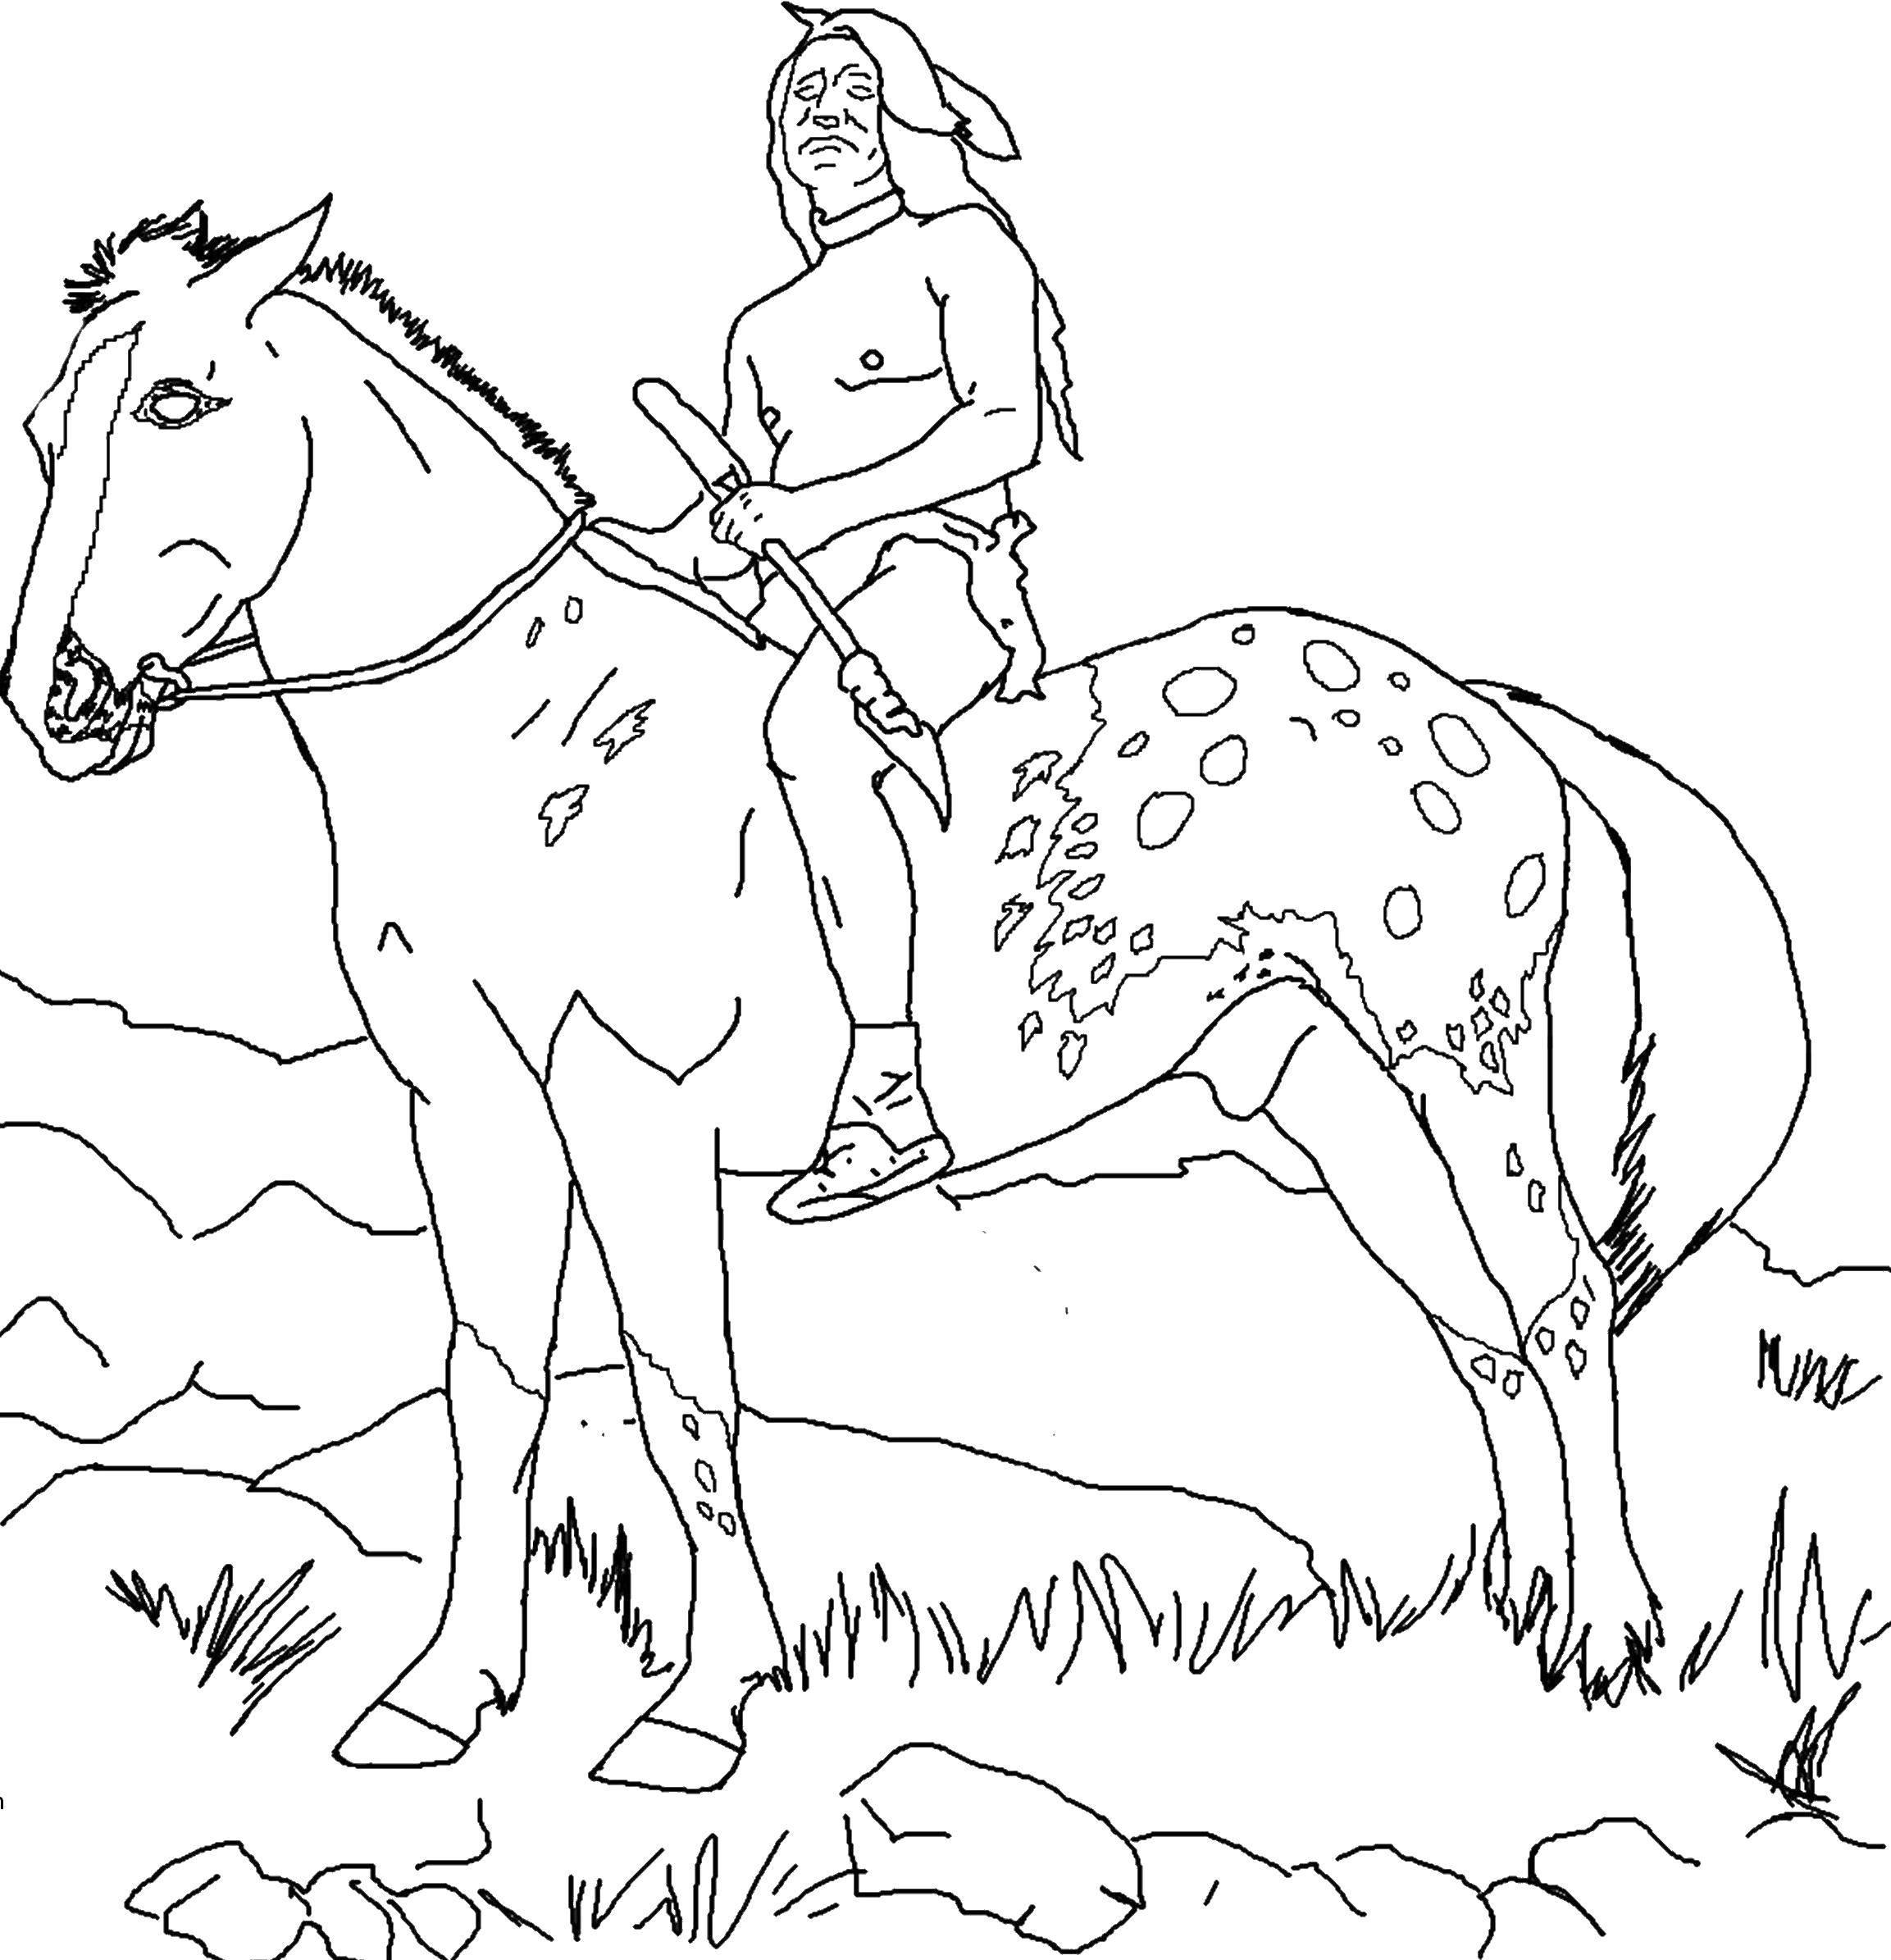 Coloring Indian on horseback. Category the Indians. Tags:  The Indian.